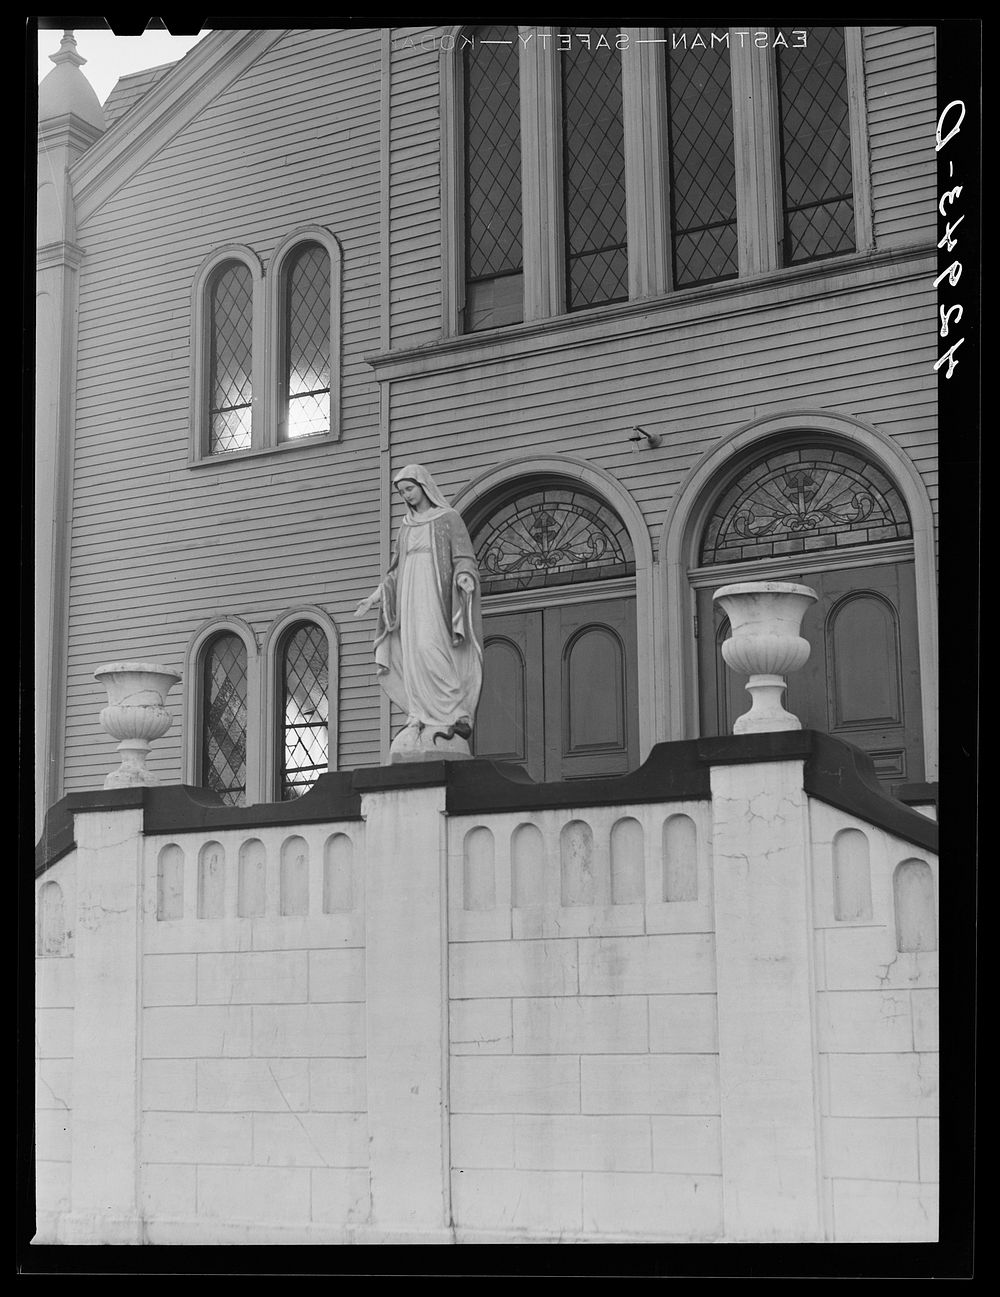 Madonna in front of church. New Bedford, Massachusetts. Sourced from the Library of Congress.